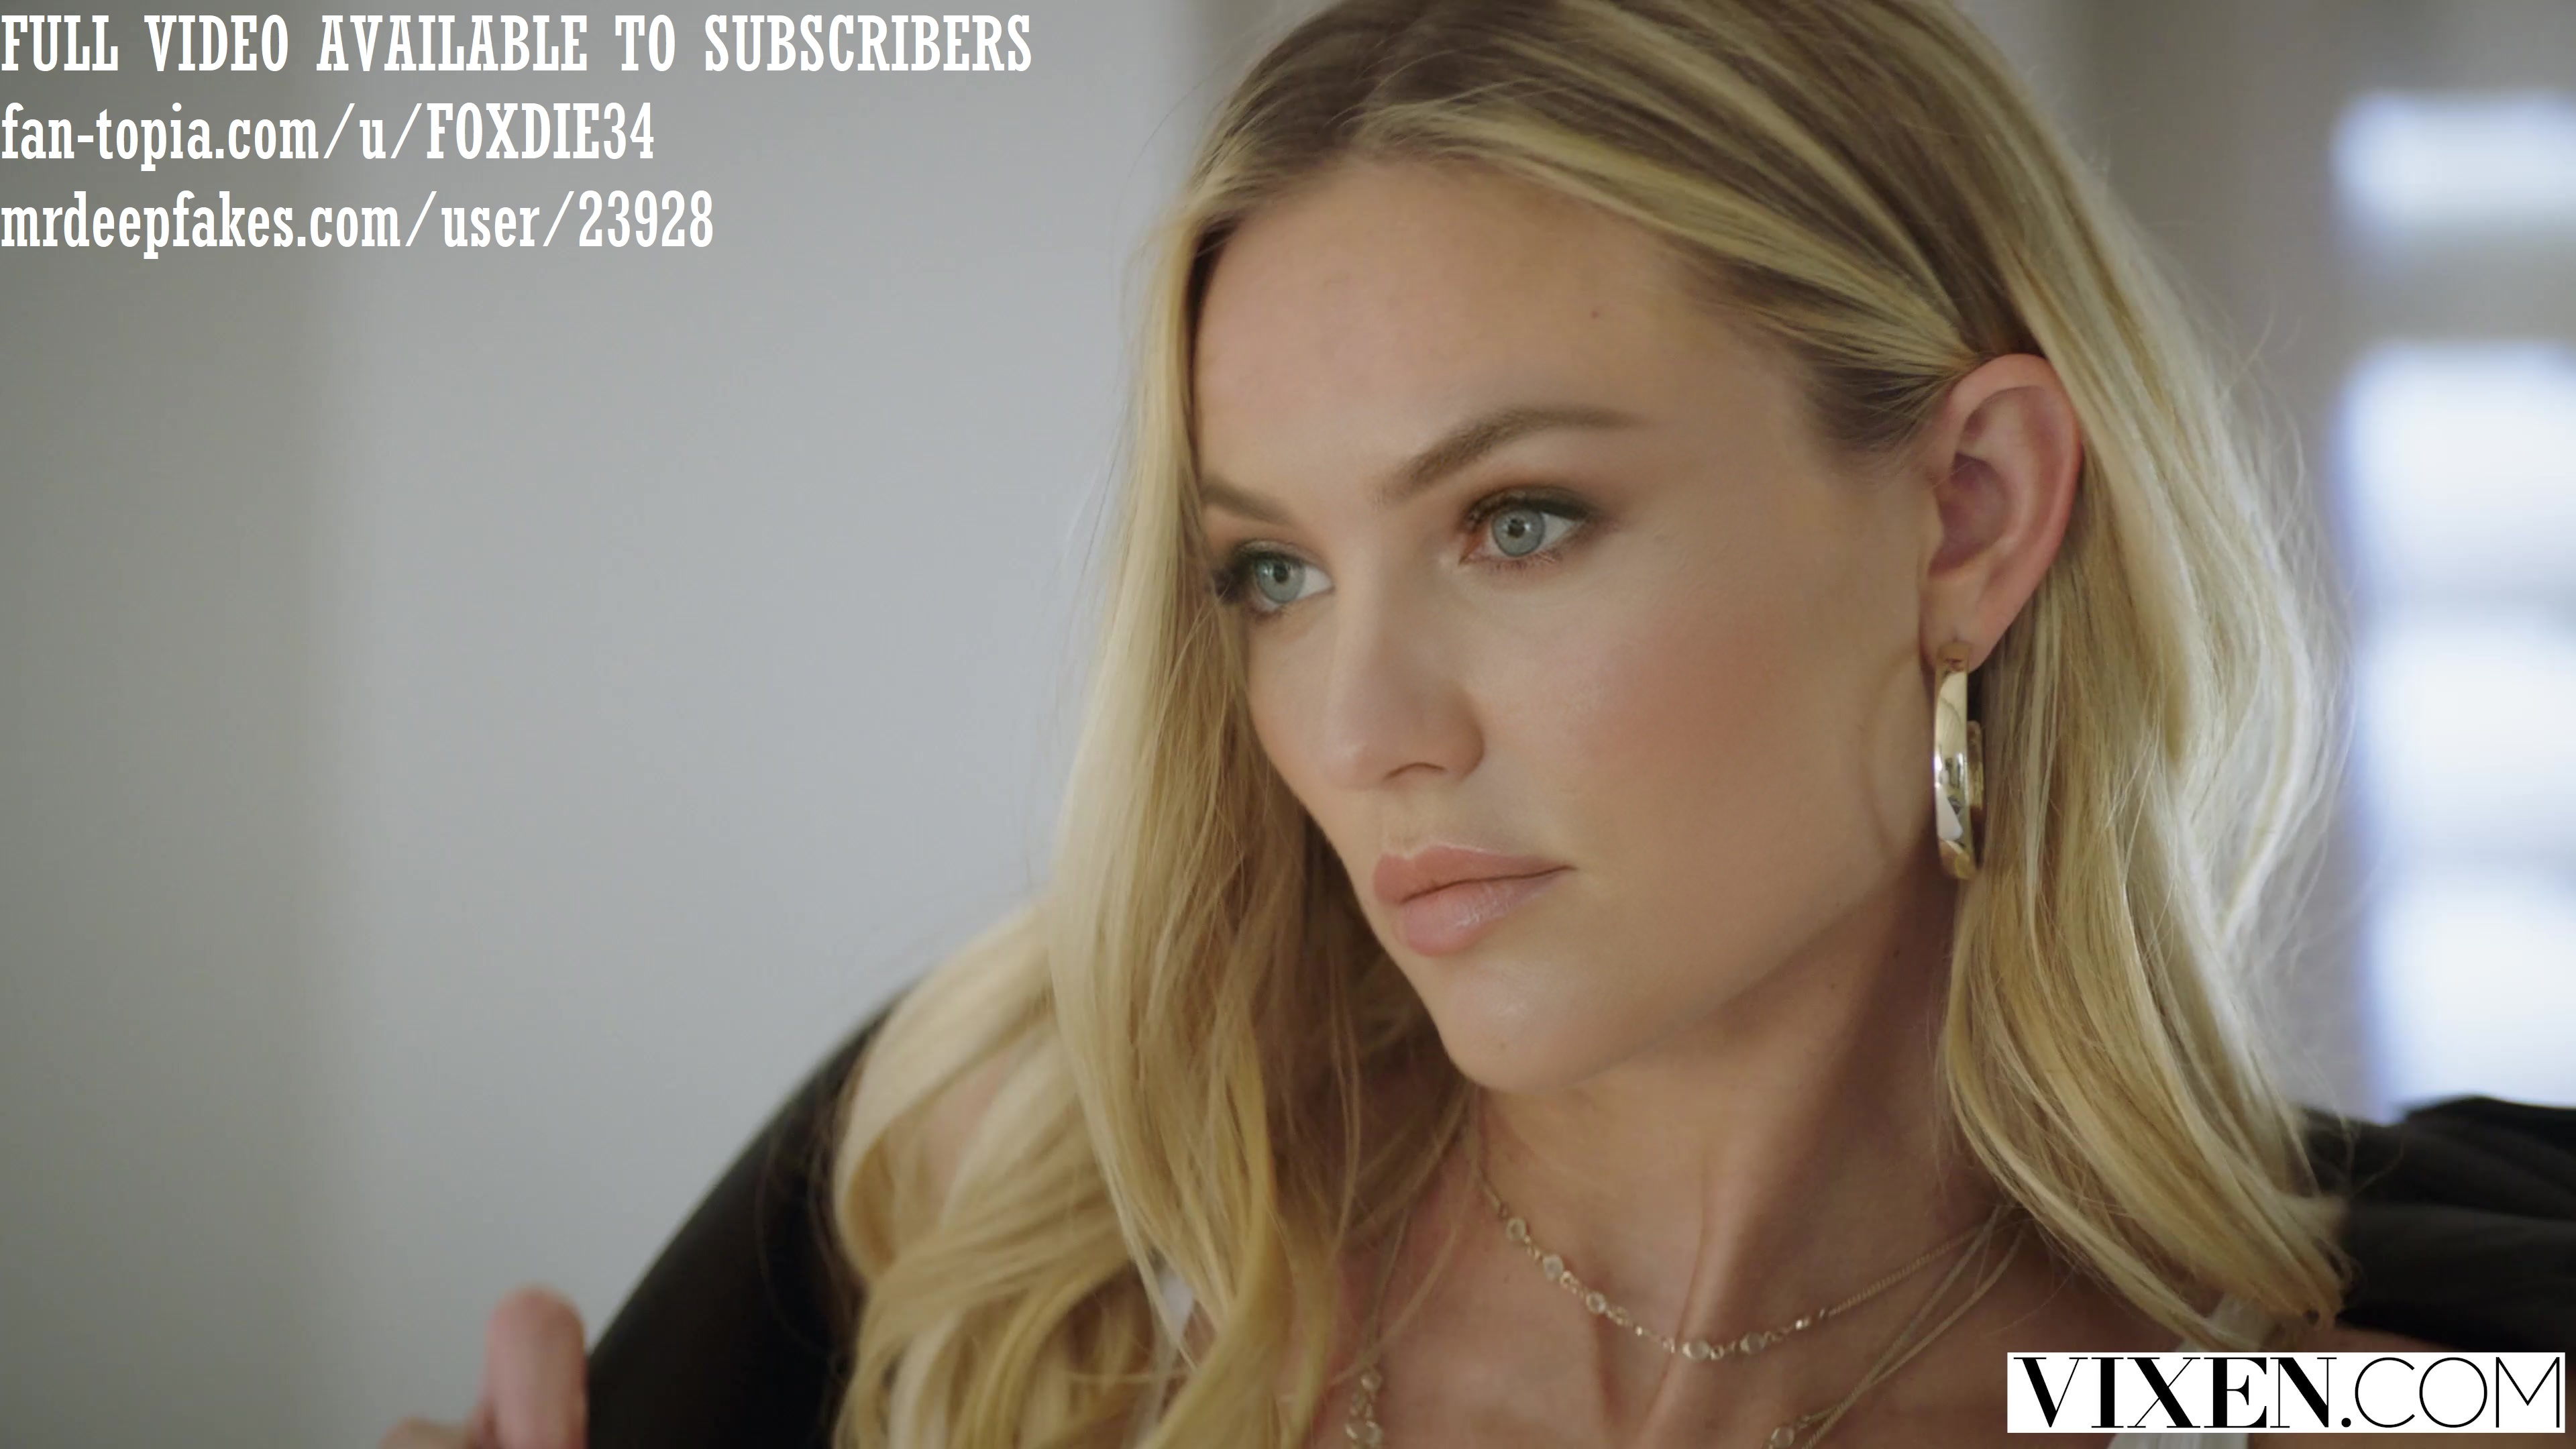 Candice Swanepoel - No Matter The Cost - Vixen (Preview) (4K, 23min)